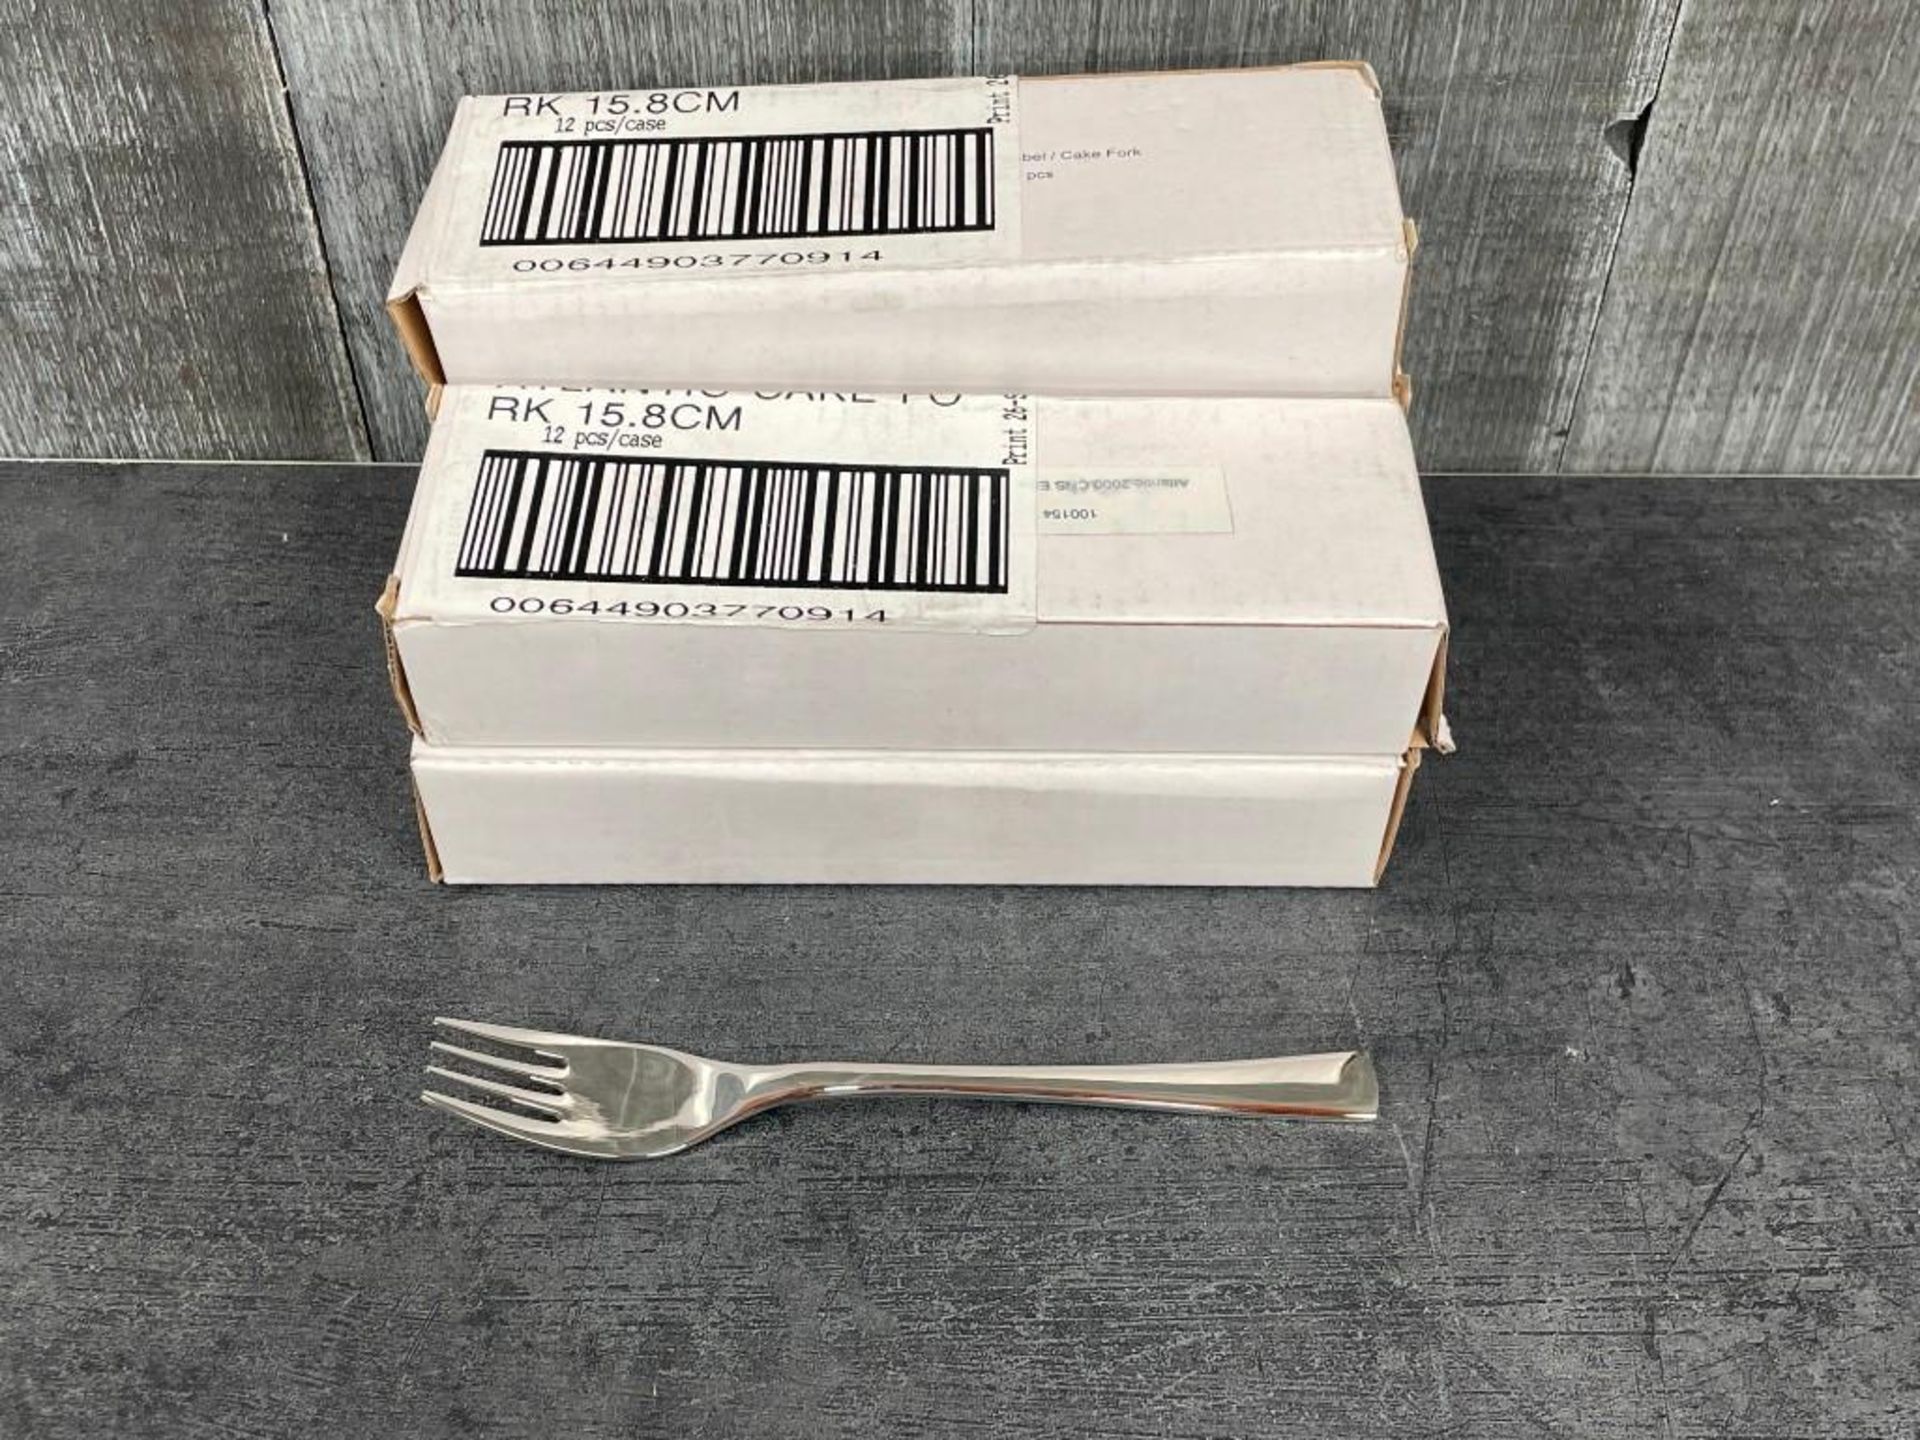 ATLANTIC HEAVY WEIGHT CAKE FORKS, SOLA MB223 - LOT OF 60 (5 BOXES) - Image 2 of 4